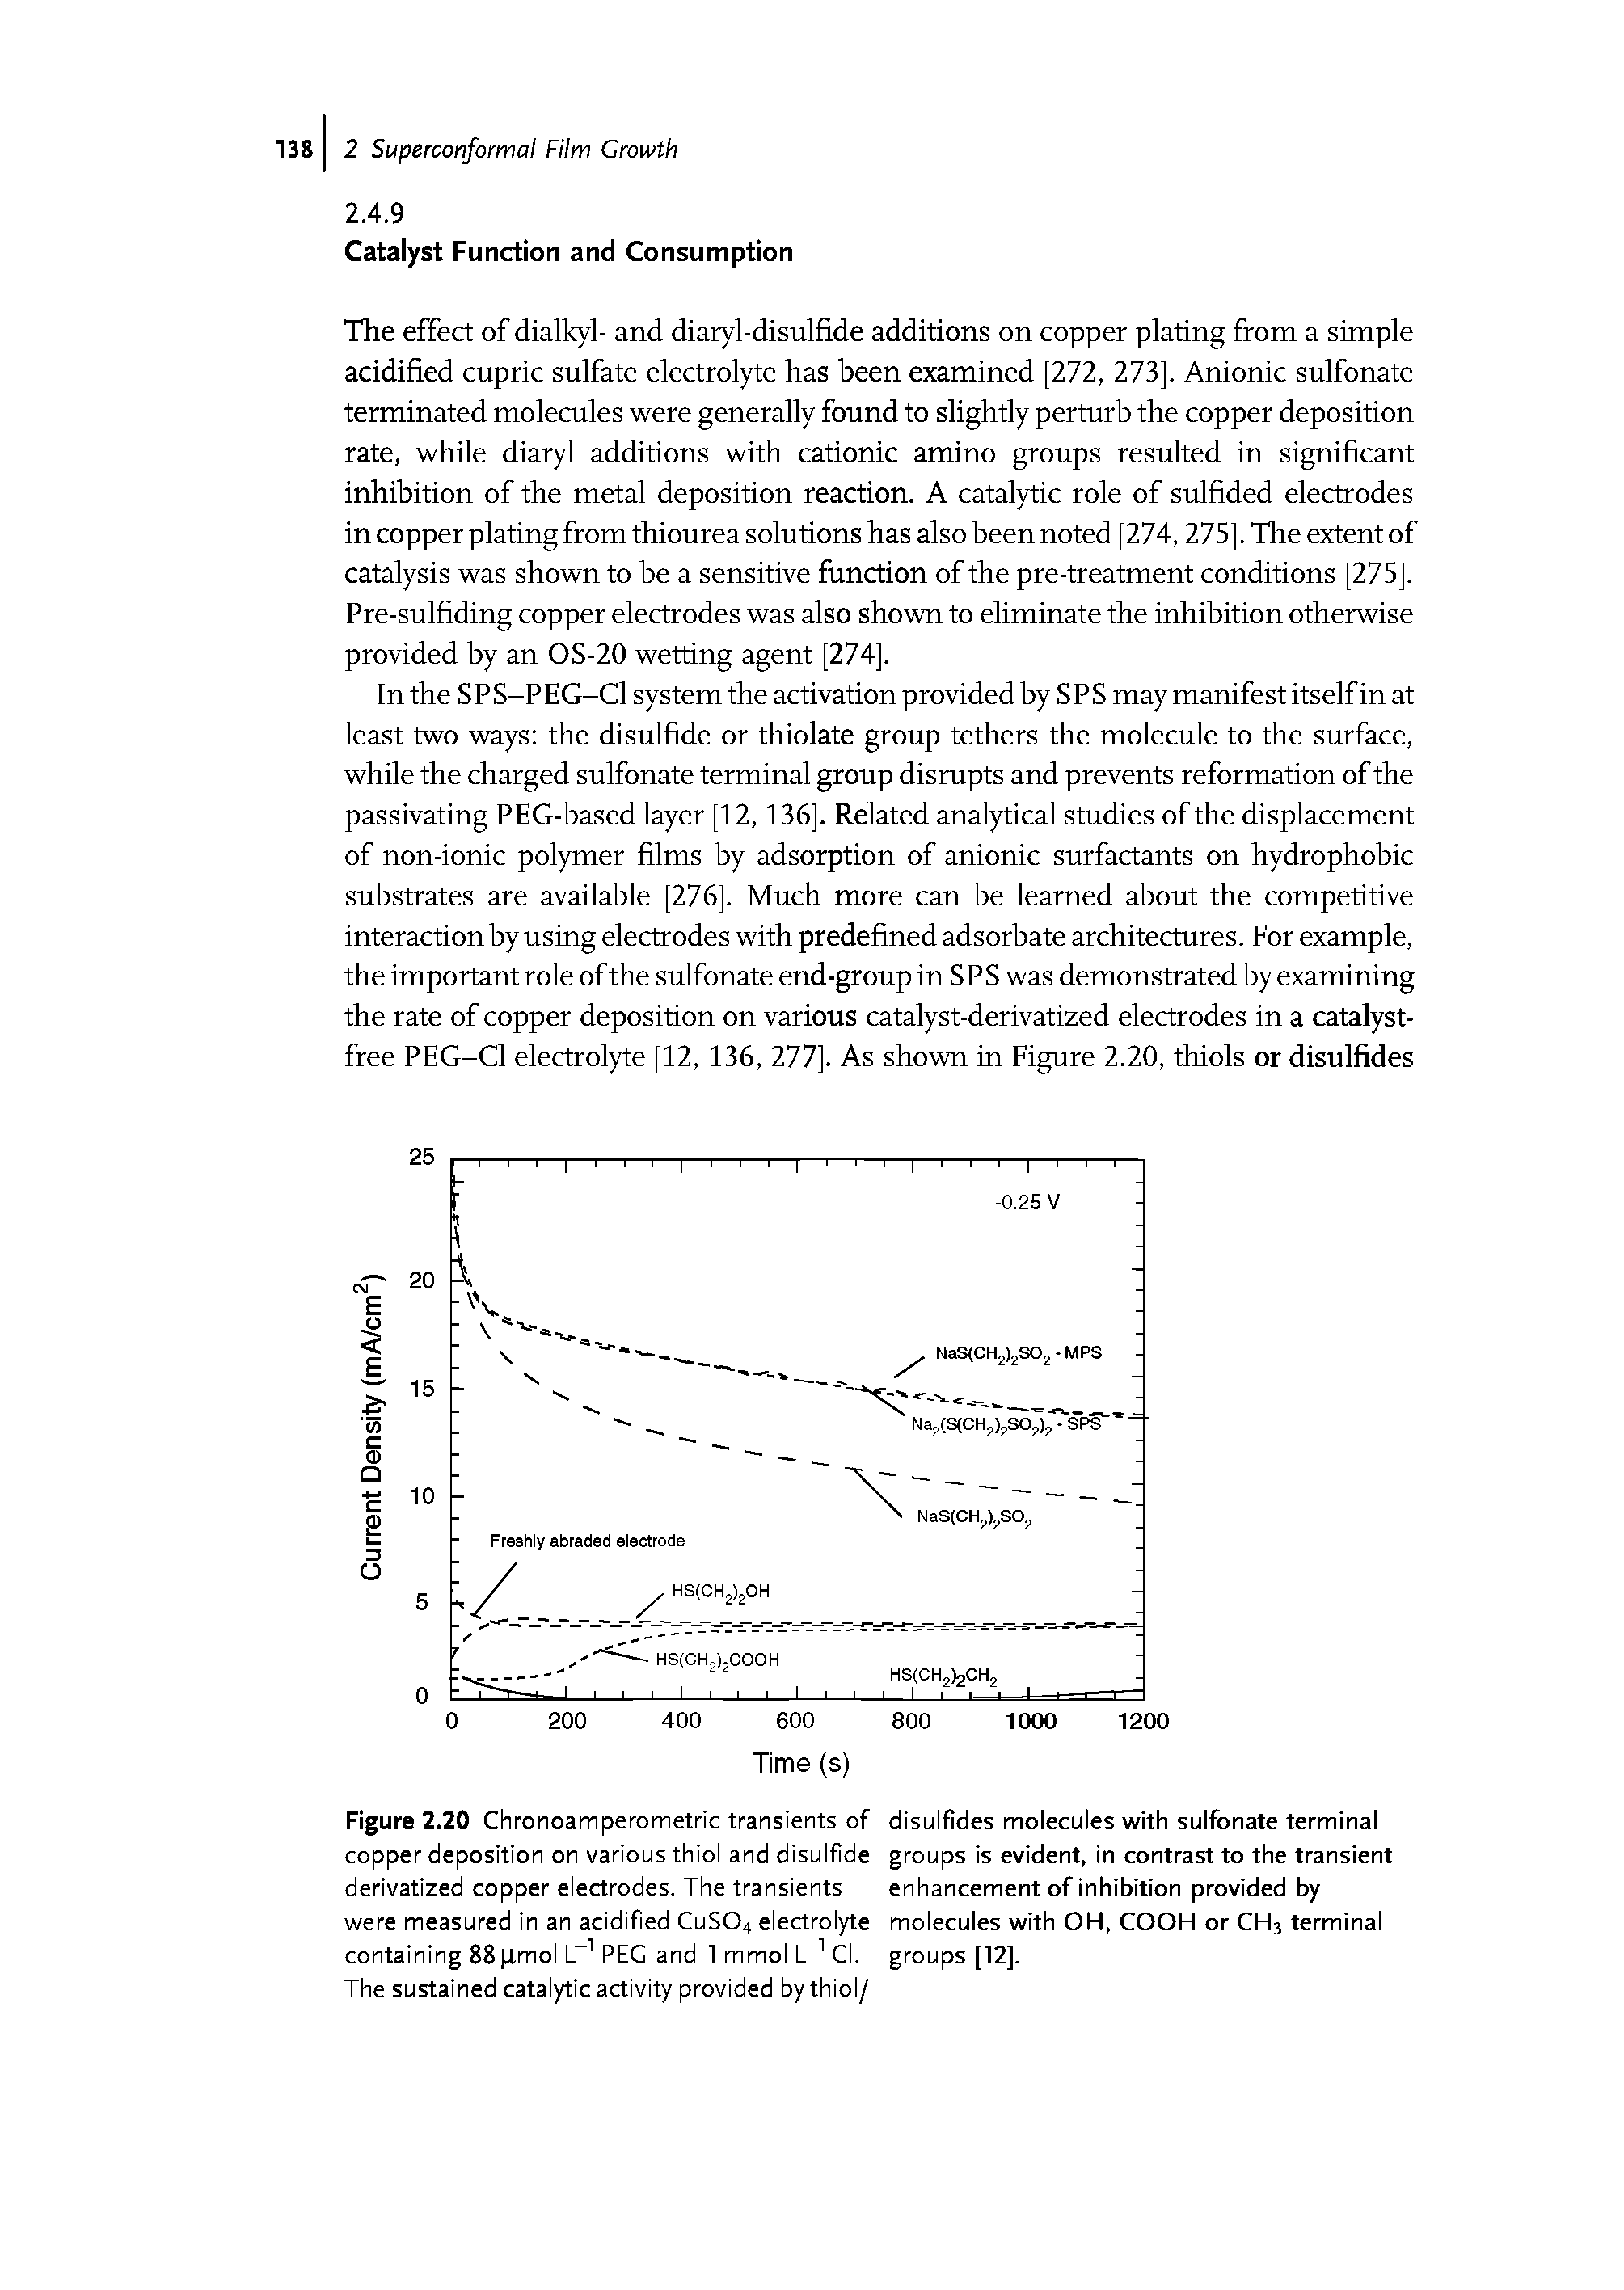 Figure 2.20 Chronoamperometric transients of disulfides molecules with sulfonate terminal copper deposition on various thiol and disulfide groups is evident, in contrast to the transient derivatized copper electrodes. The transients enhancement of inhibition provided by were measured in an acidified CuS04 electrolyte molecules with OH, COOH or CH3 terminal containing 88 Xmol L-1 PEG and 1 mmol lA1 Cl. groups [12].